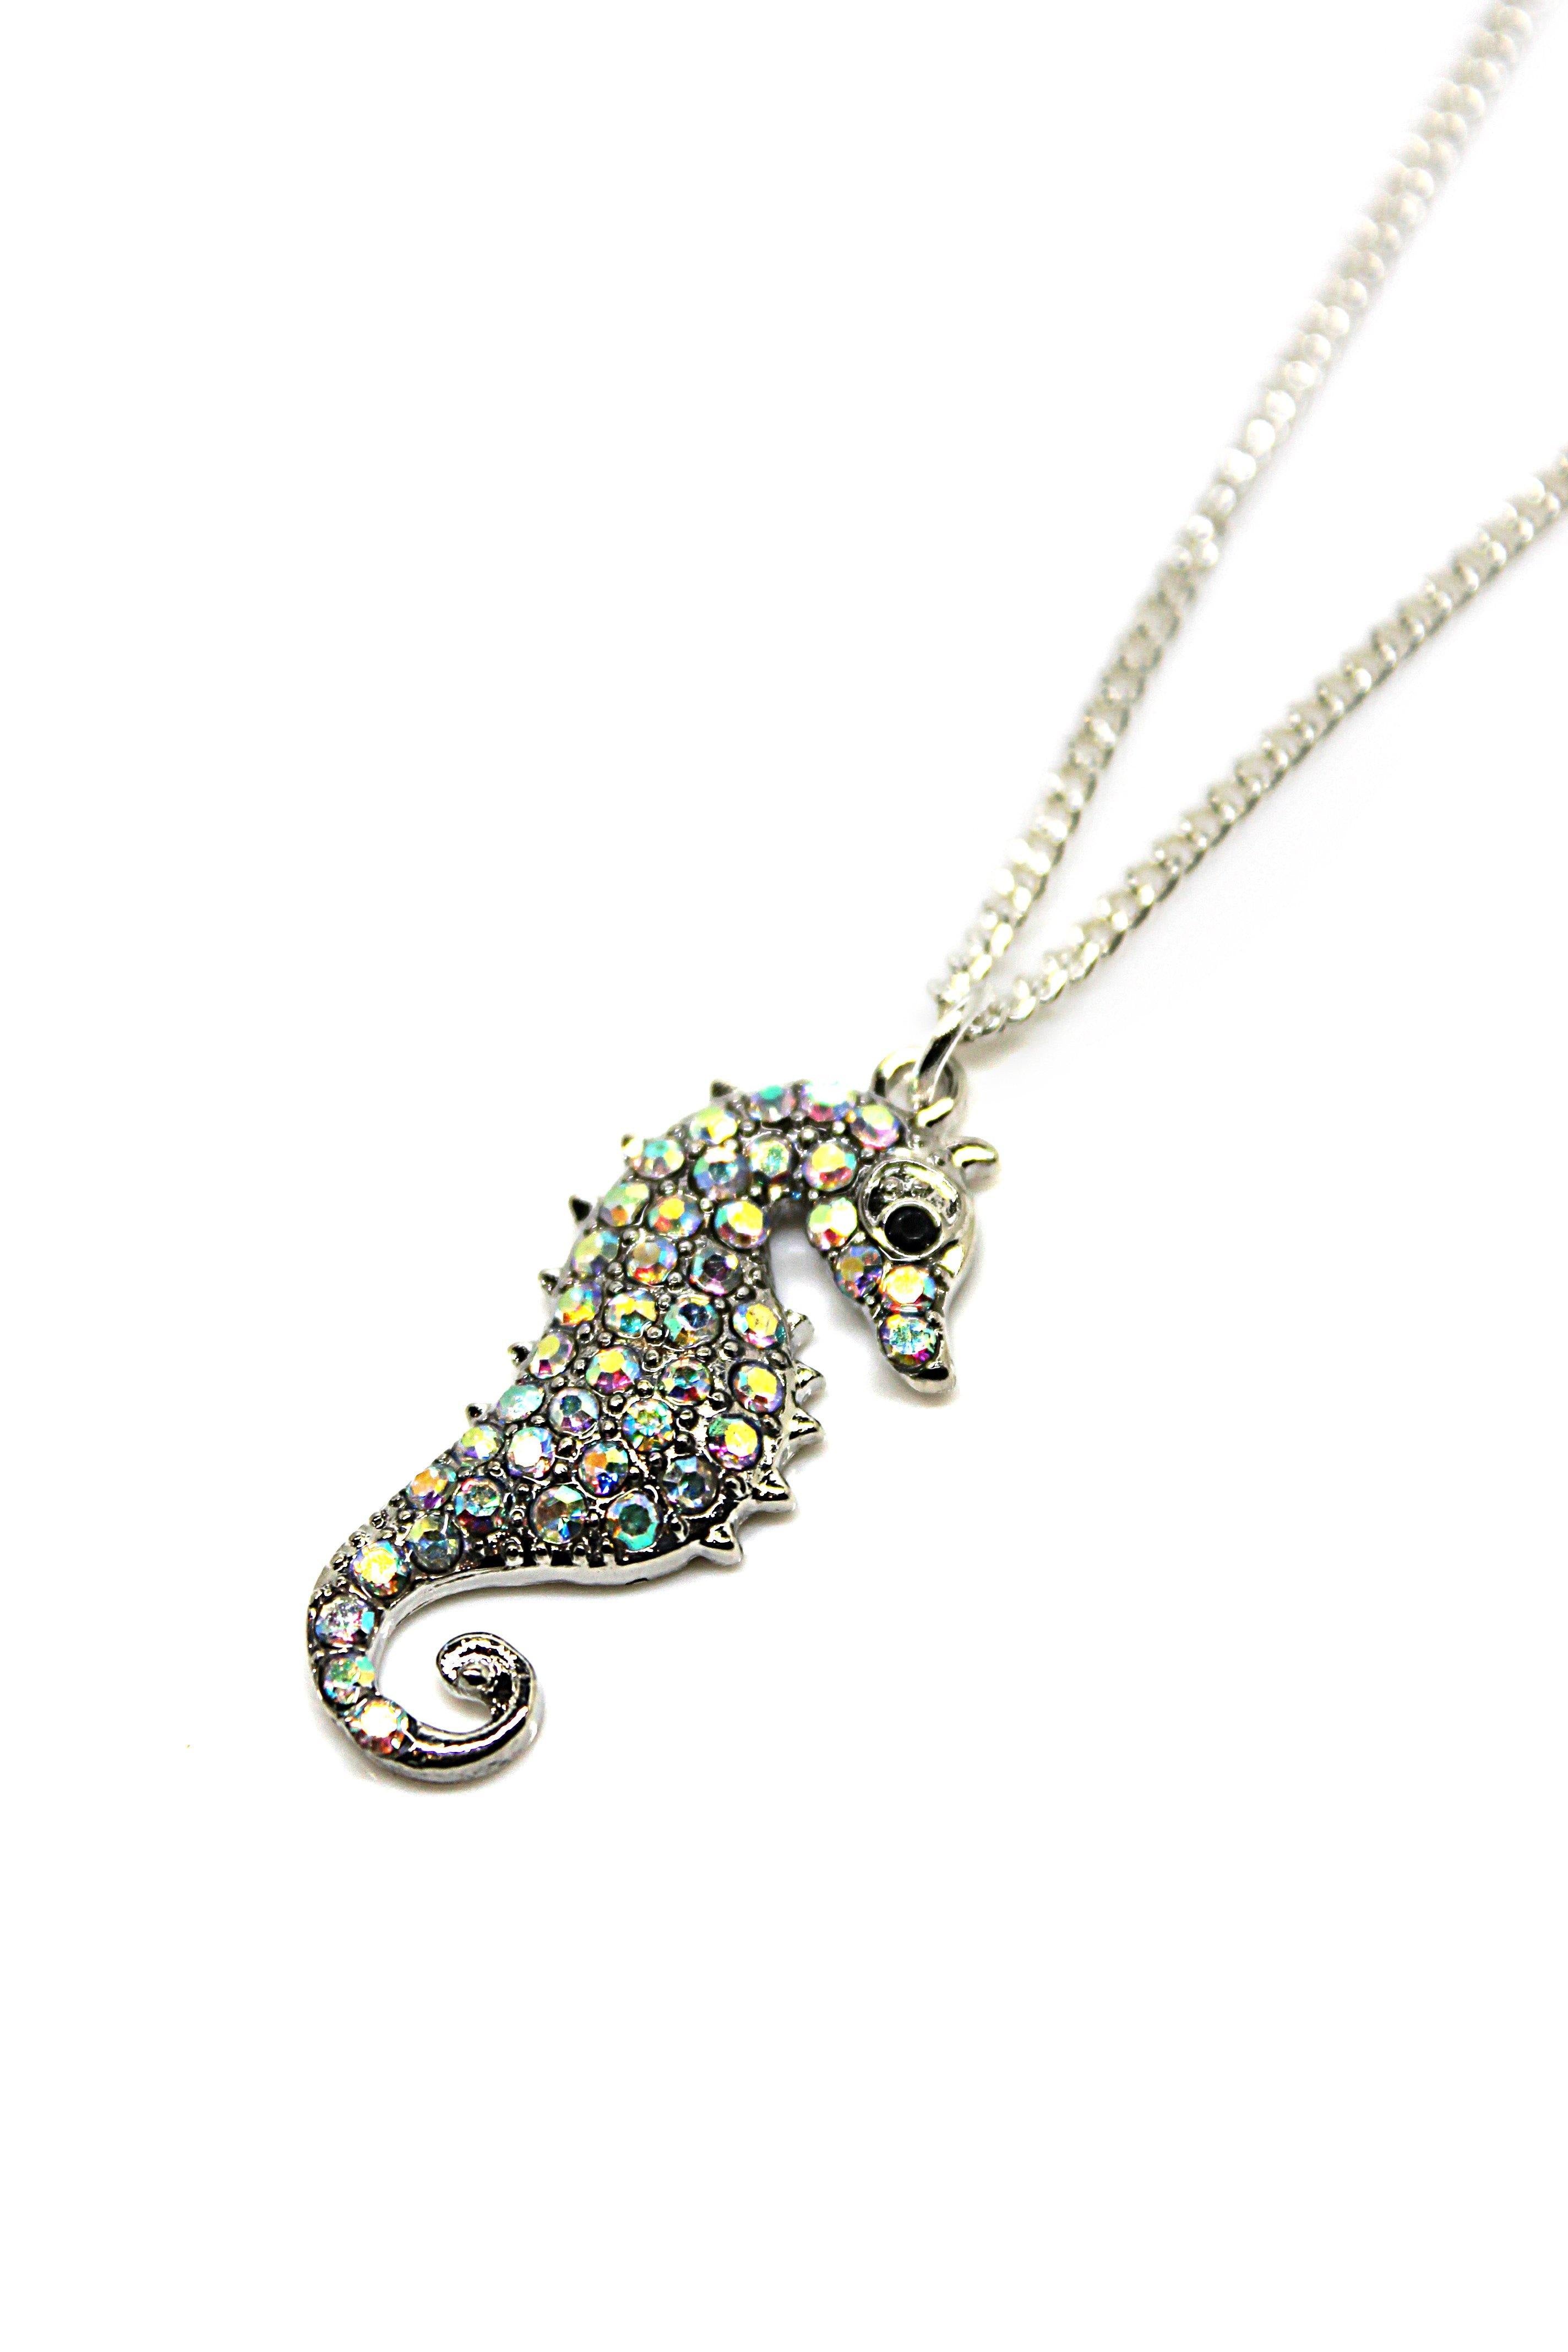 Seahorse Crystal Necklace - Wildtouch - Wildtouch